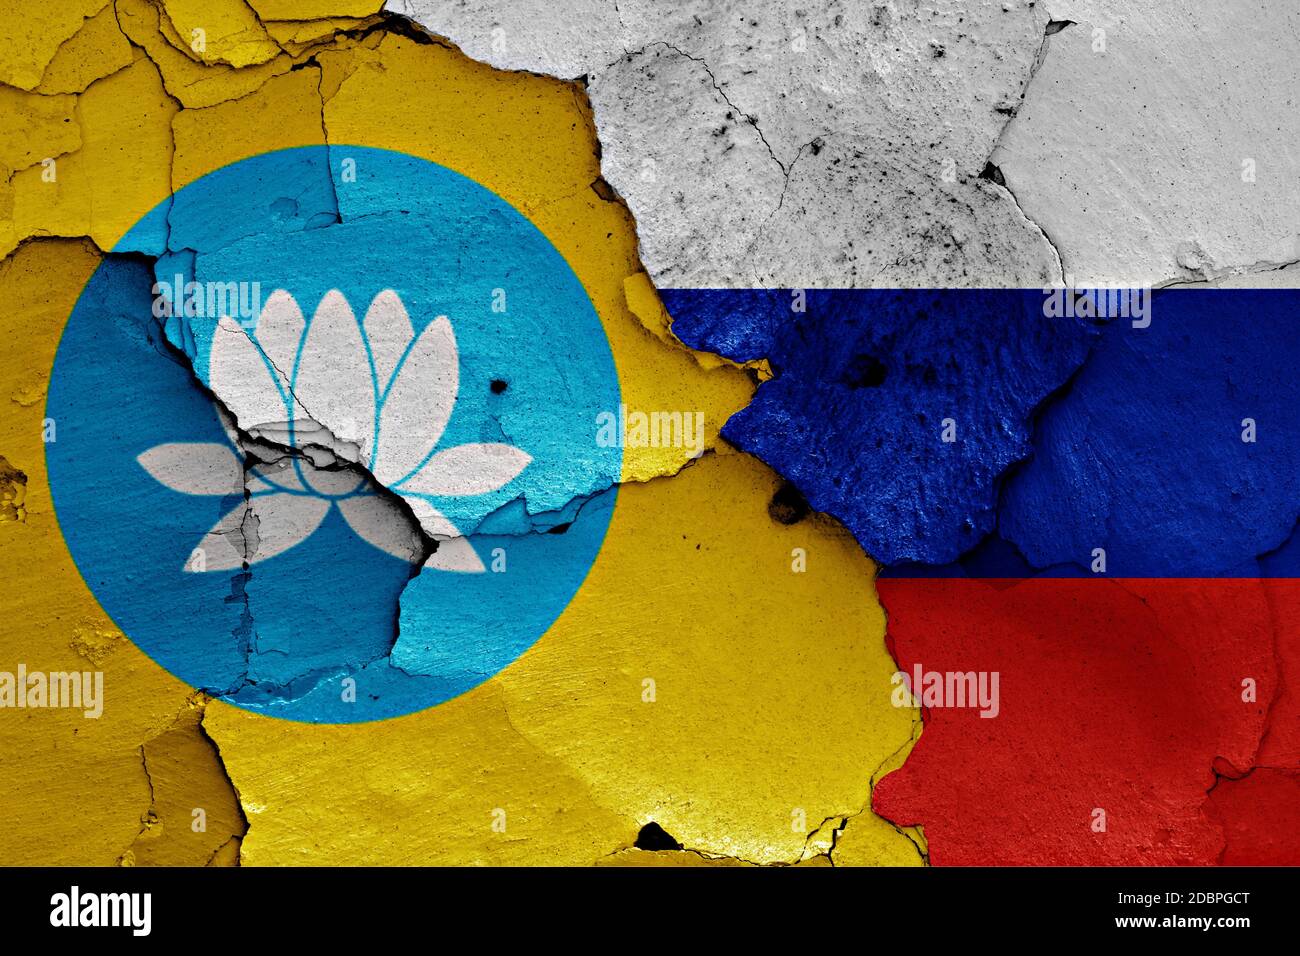 flags of Kalmykia and Russia painted on cracked wall Stock Photo